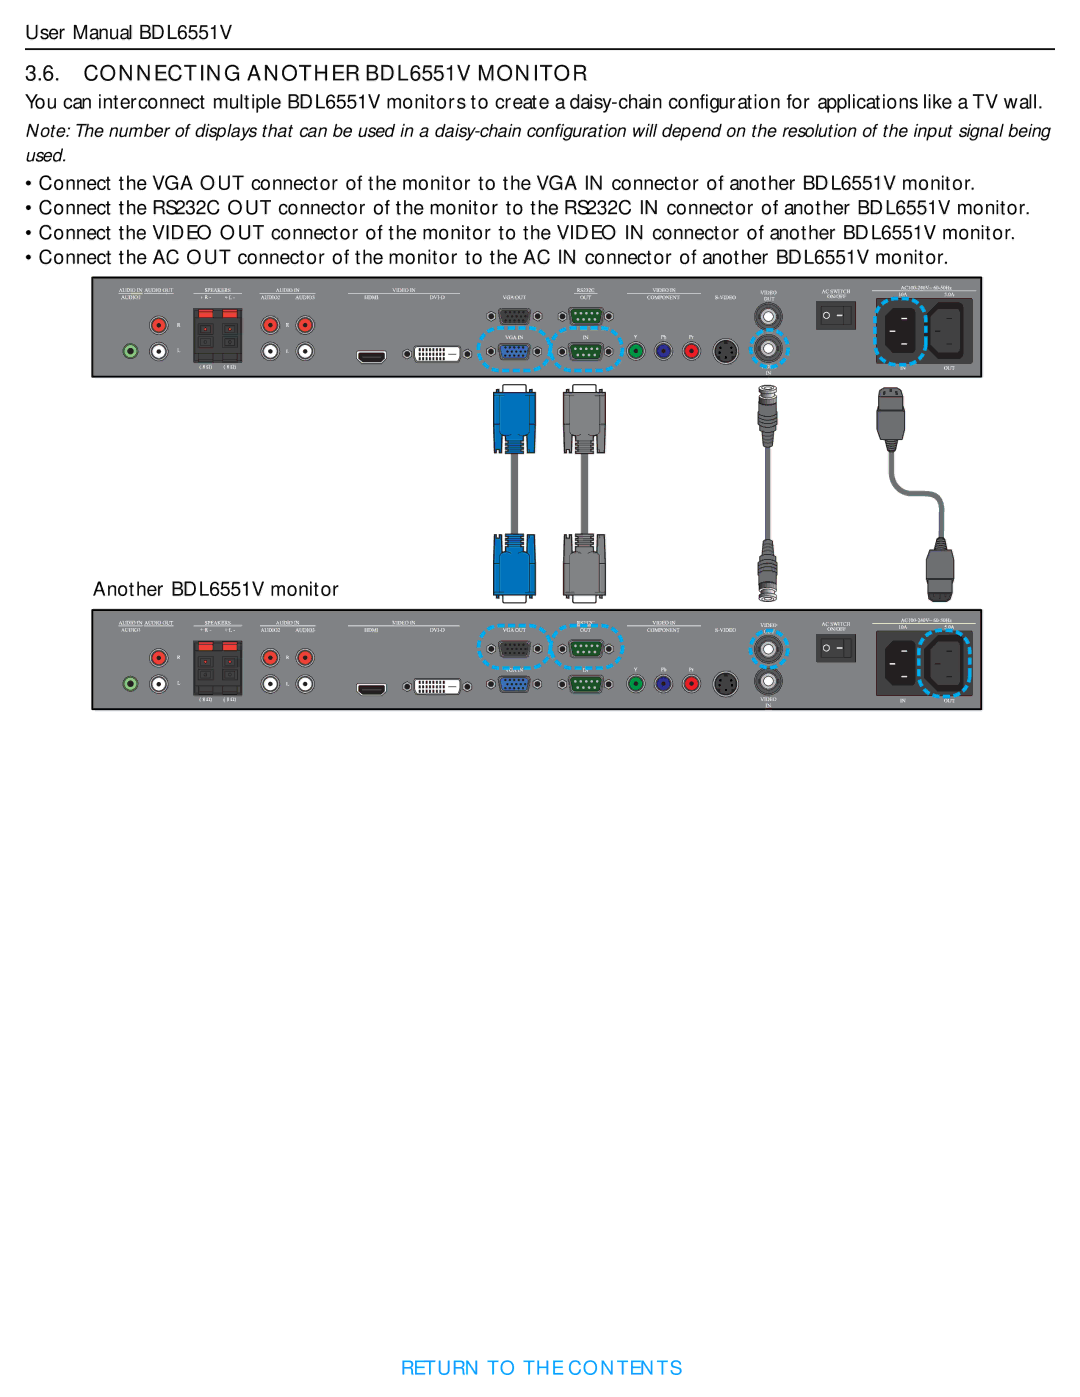 Philips user manual Connecting Another BDL6551V Monitor 